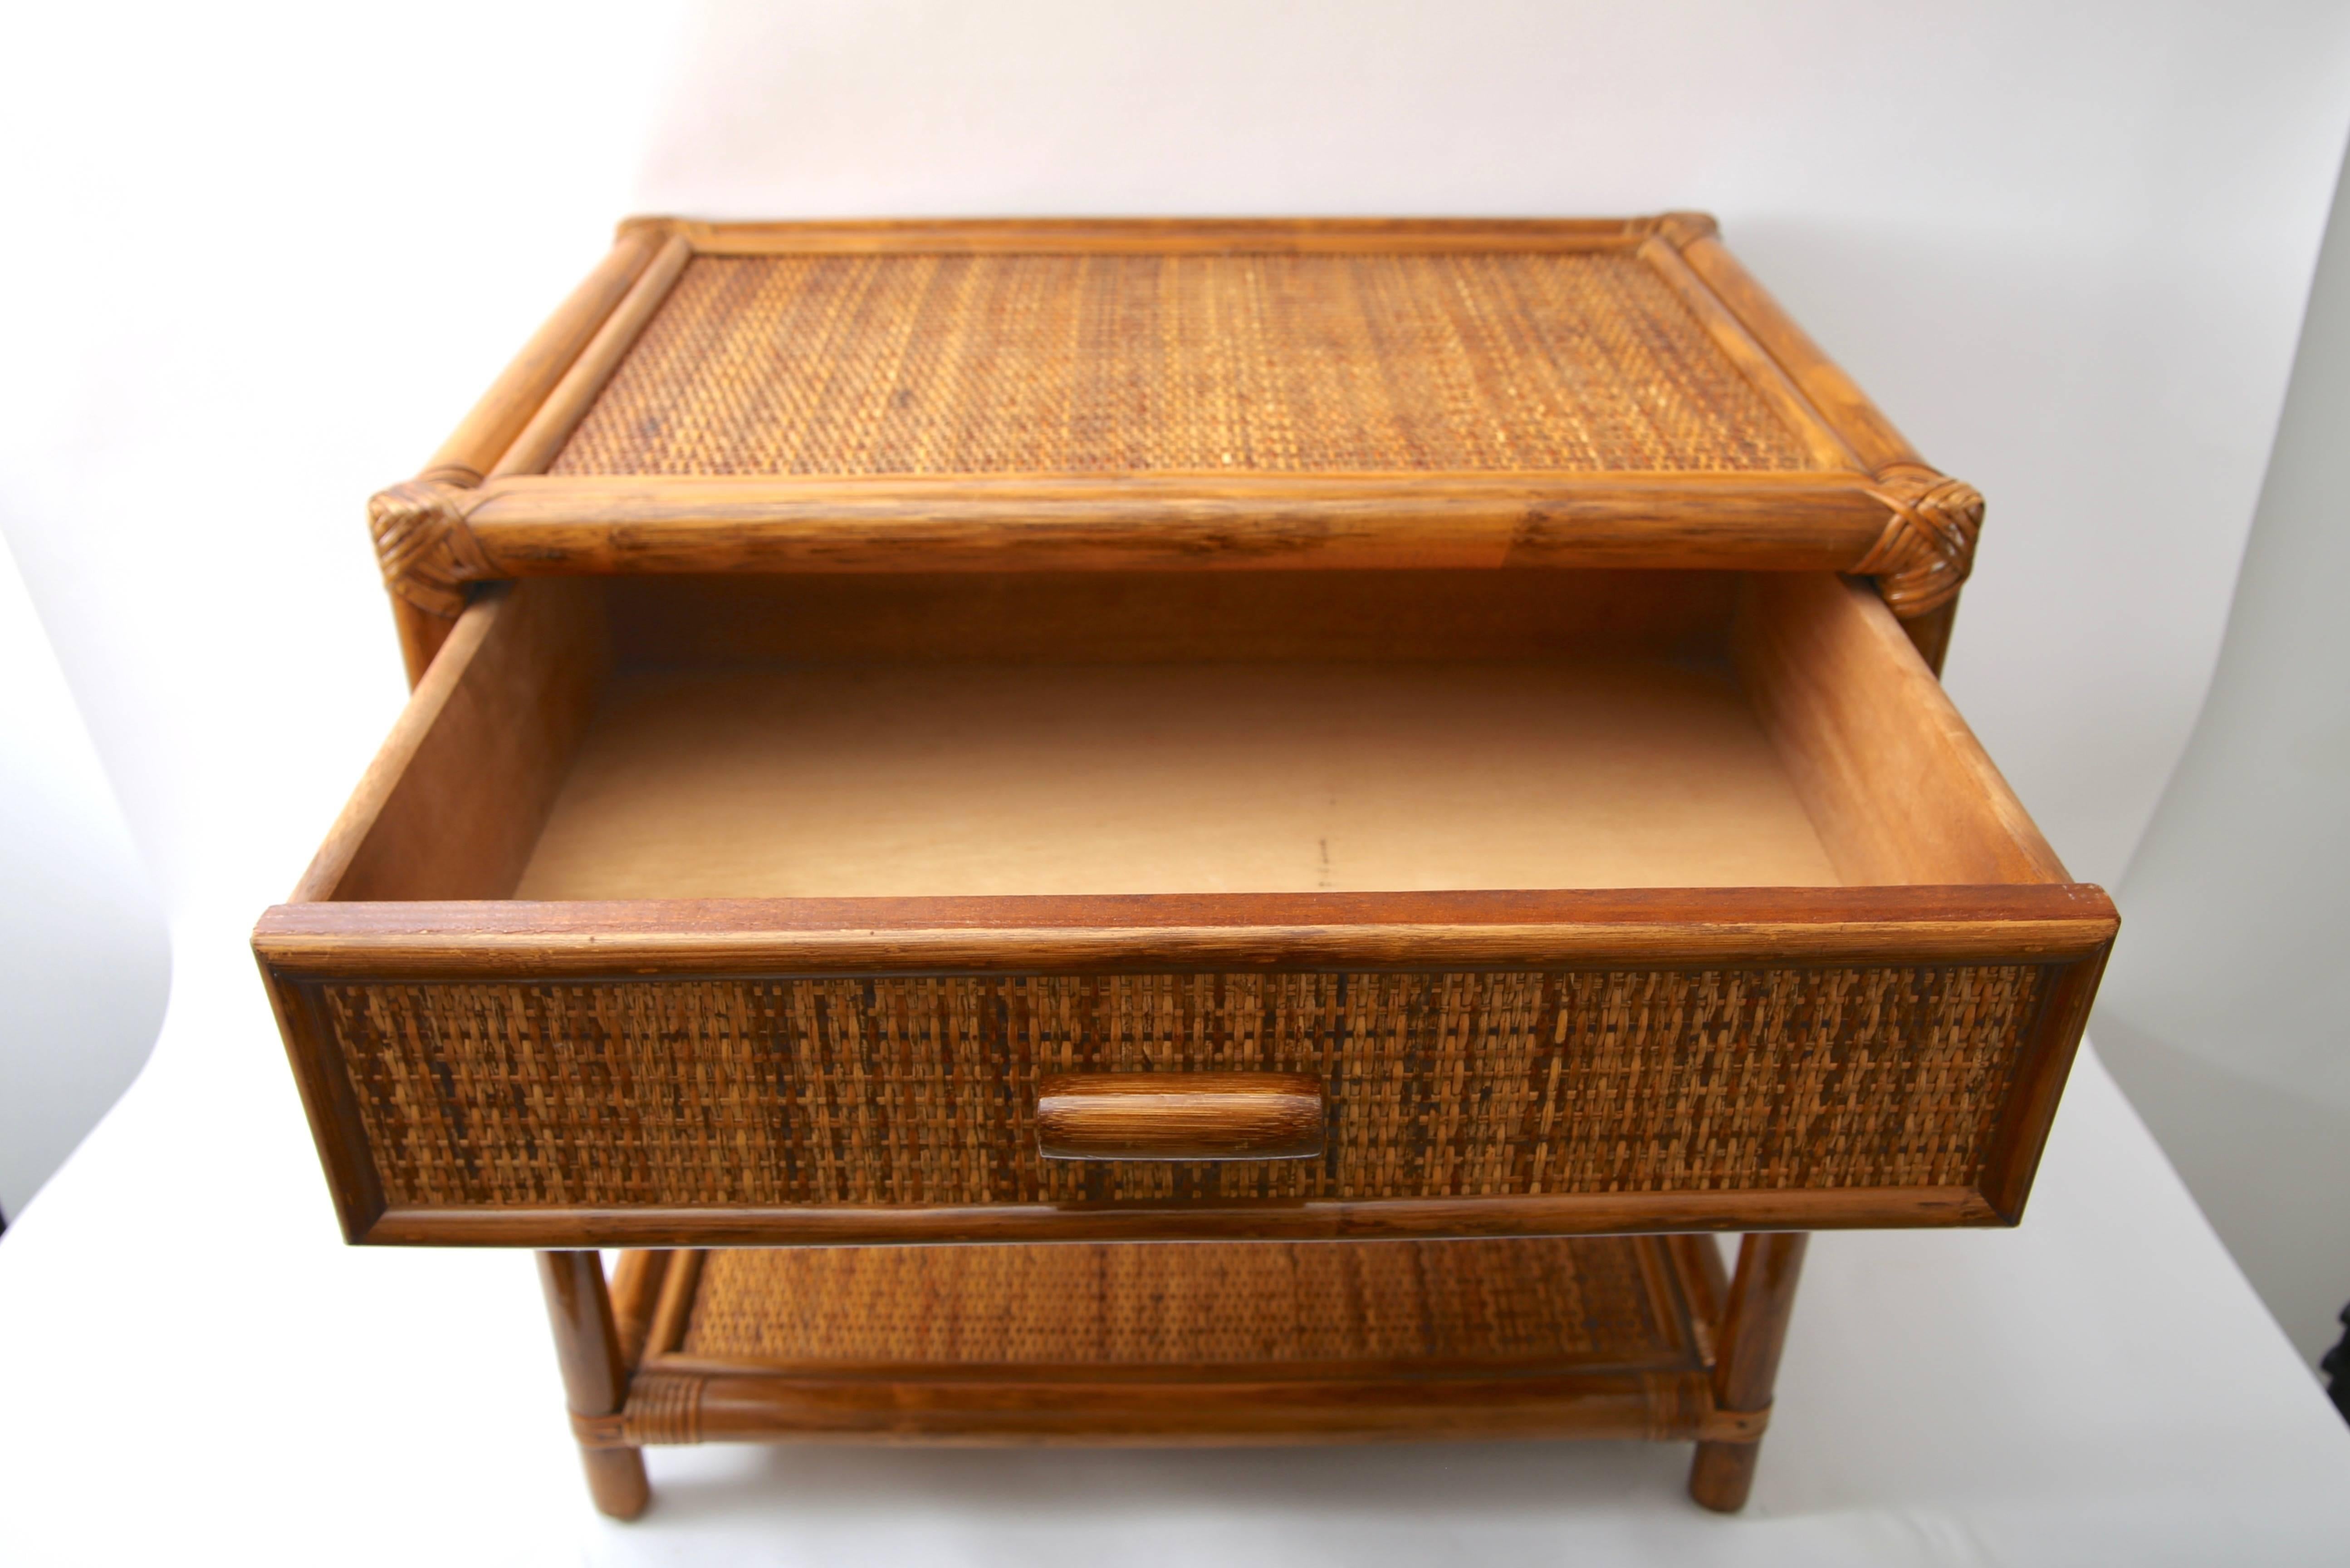 This stylish set of bamboo and rattan side tables could be used in the bedroom or at the end of a sofa.